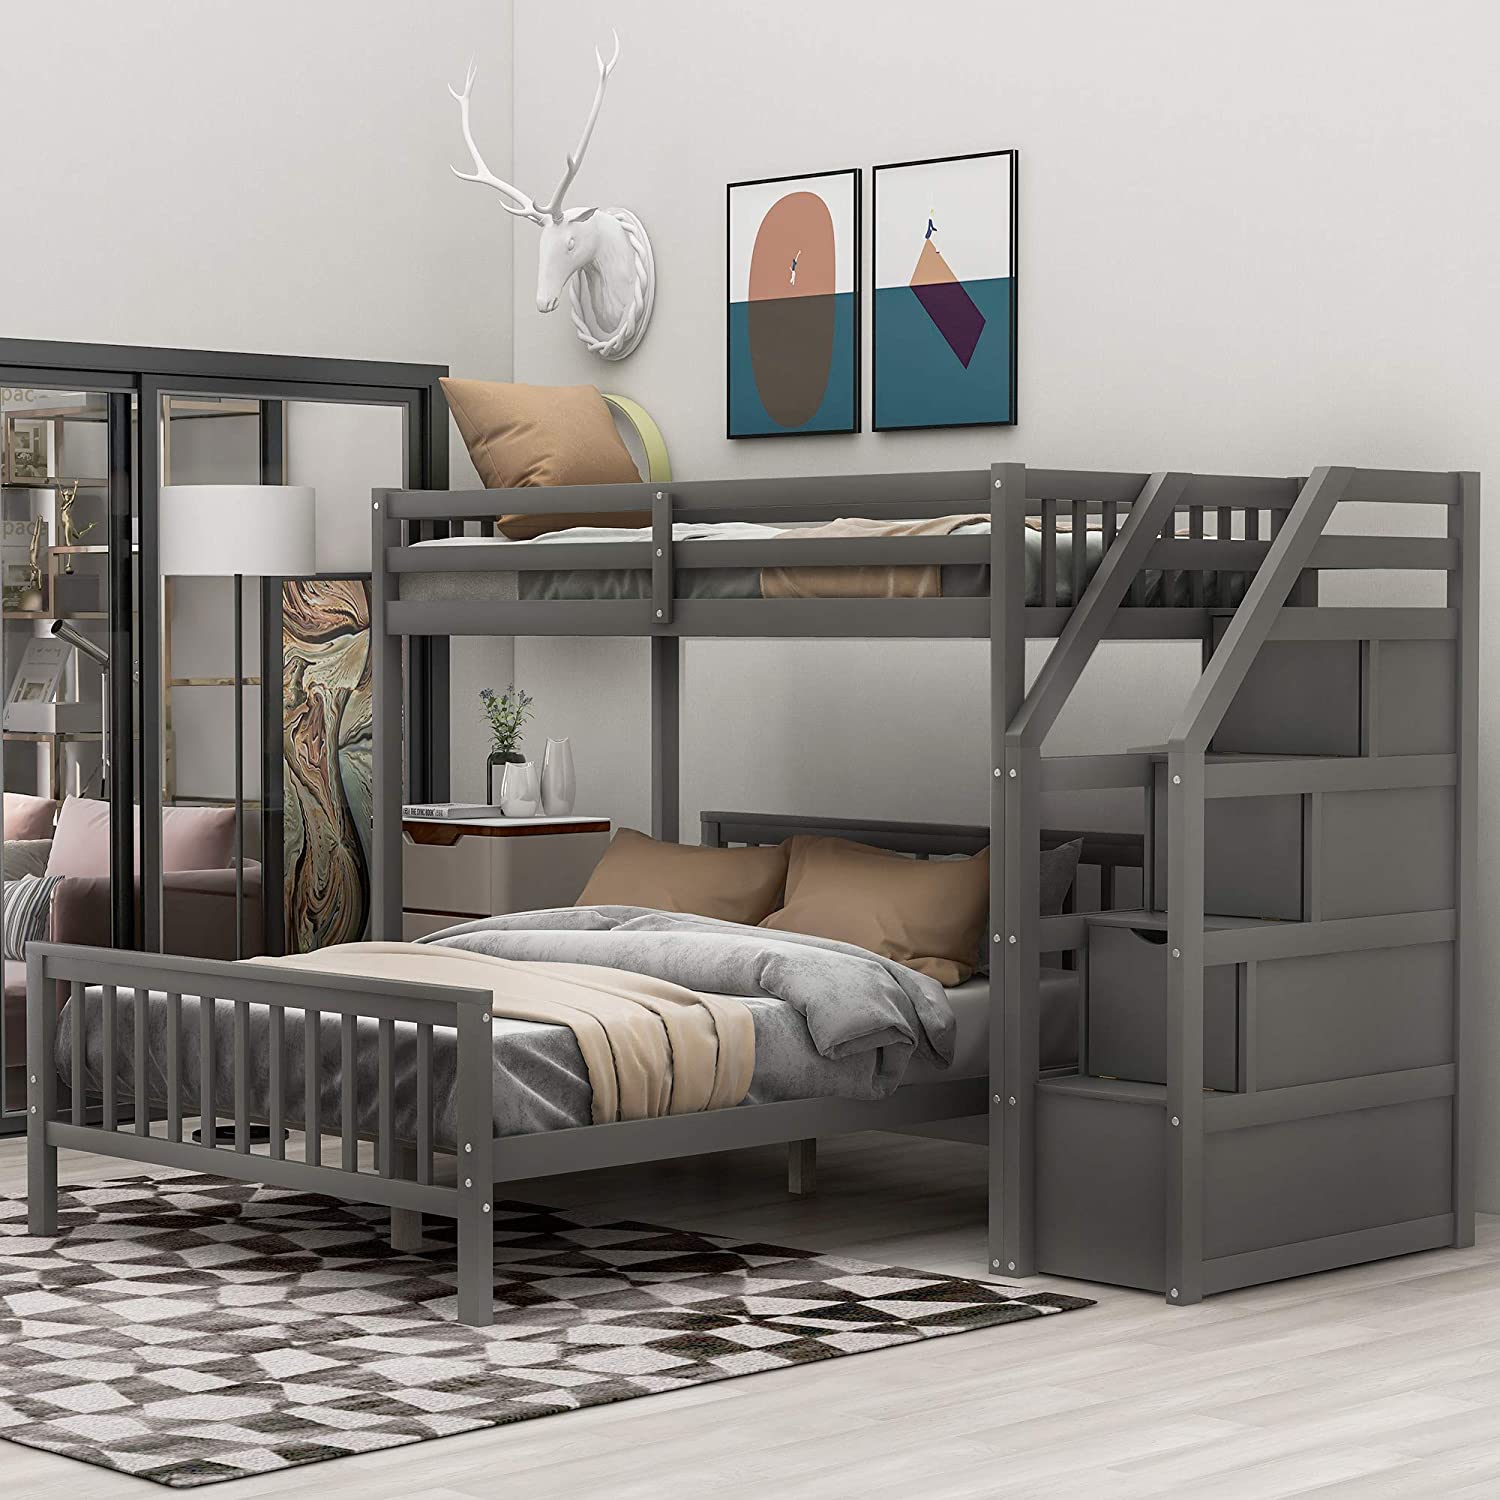 L Shaped Bunk Beds Advantages Safety, L Shaped Bunk Beds With Stairs